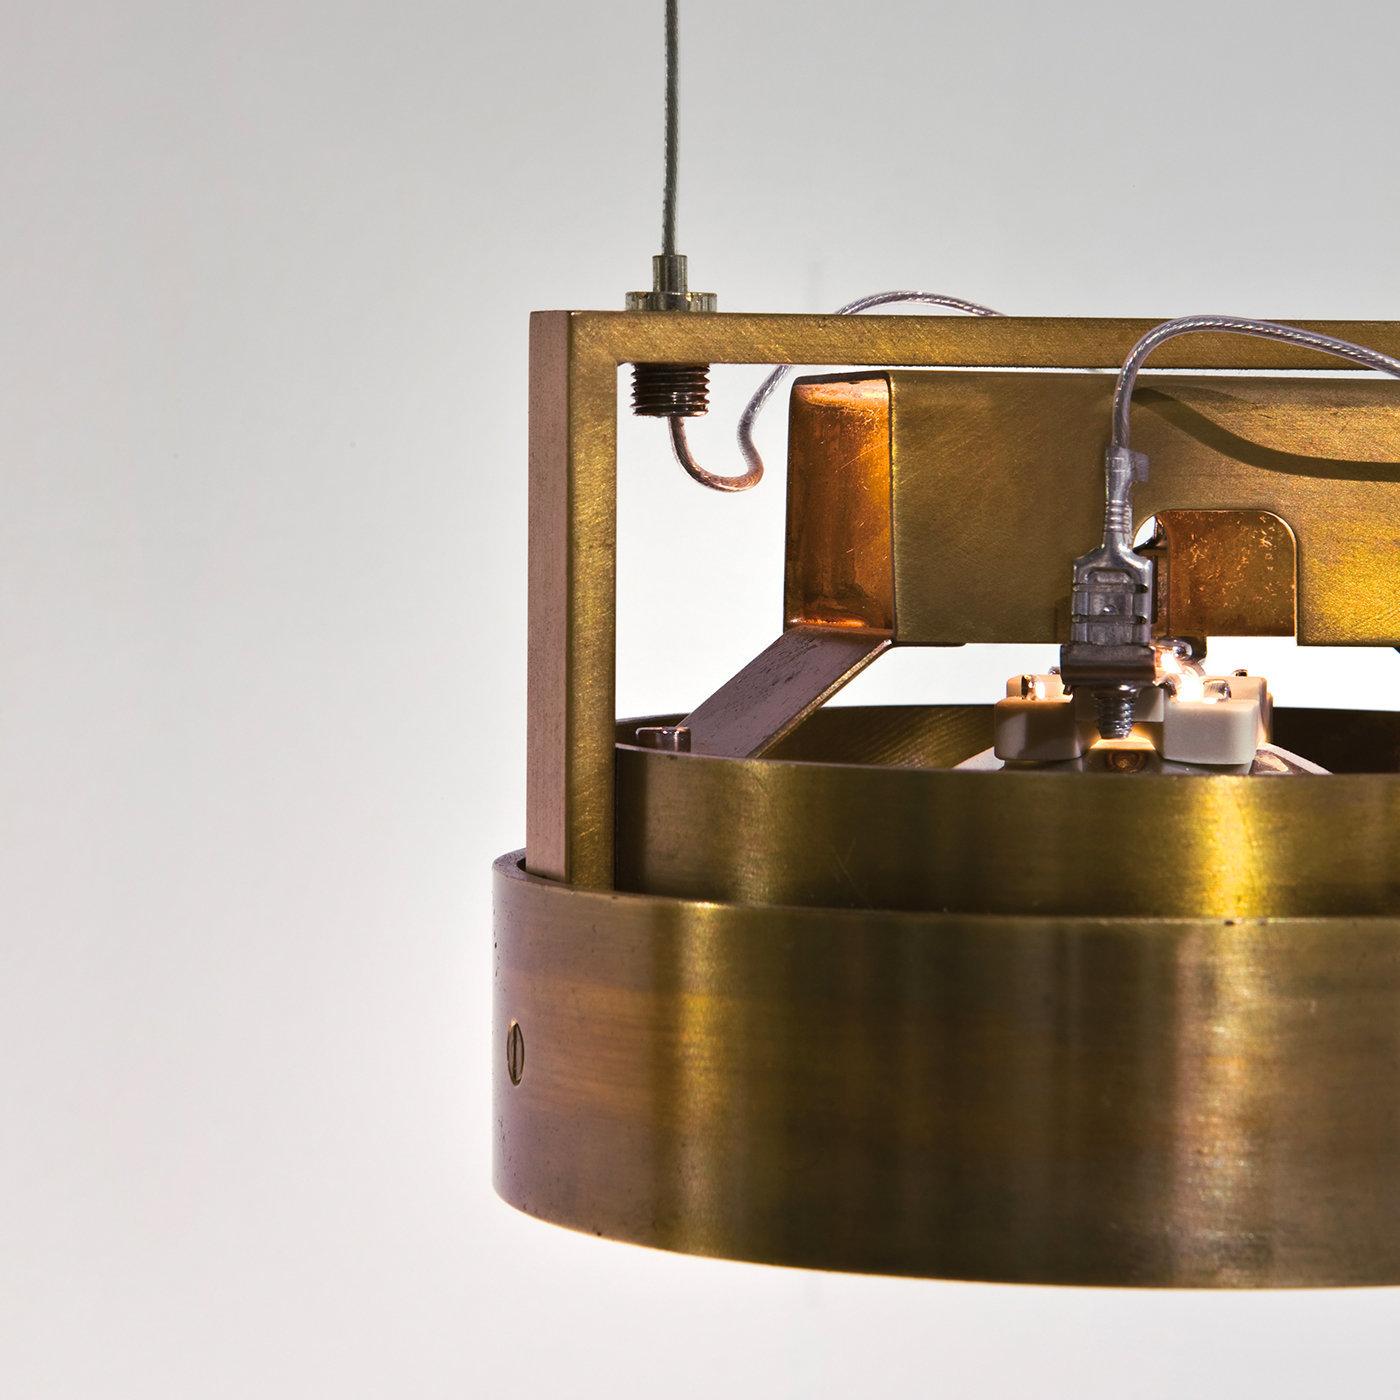 This elegant spotlight is in burnished brass and is perfect to hang from any type of ceiling to illuminate a variety of interiors, thanks to its adjustable height. The linear design and use of precious materials are staples of Laura Meroni and this